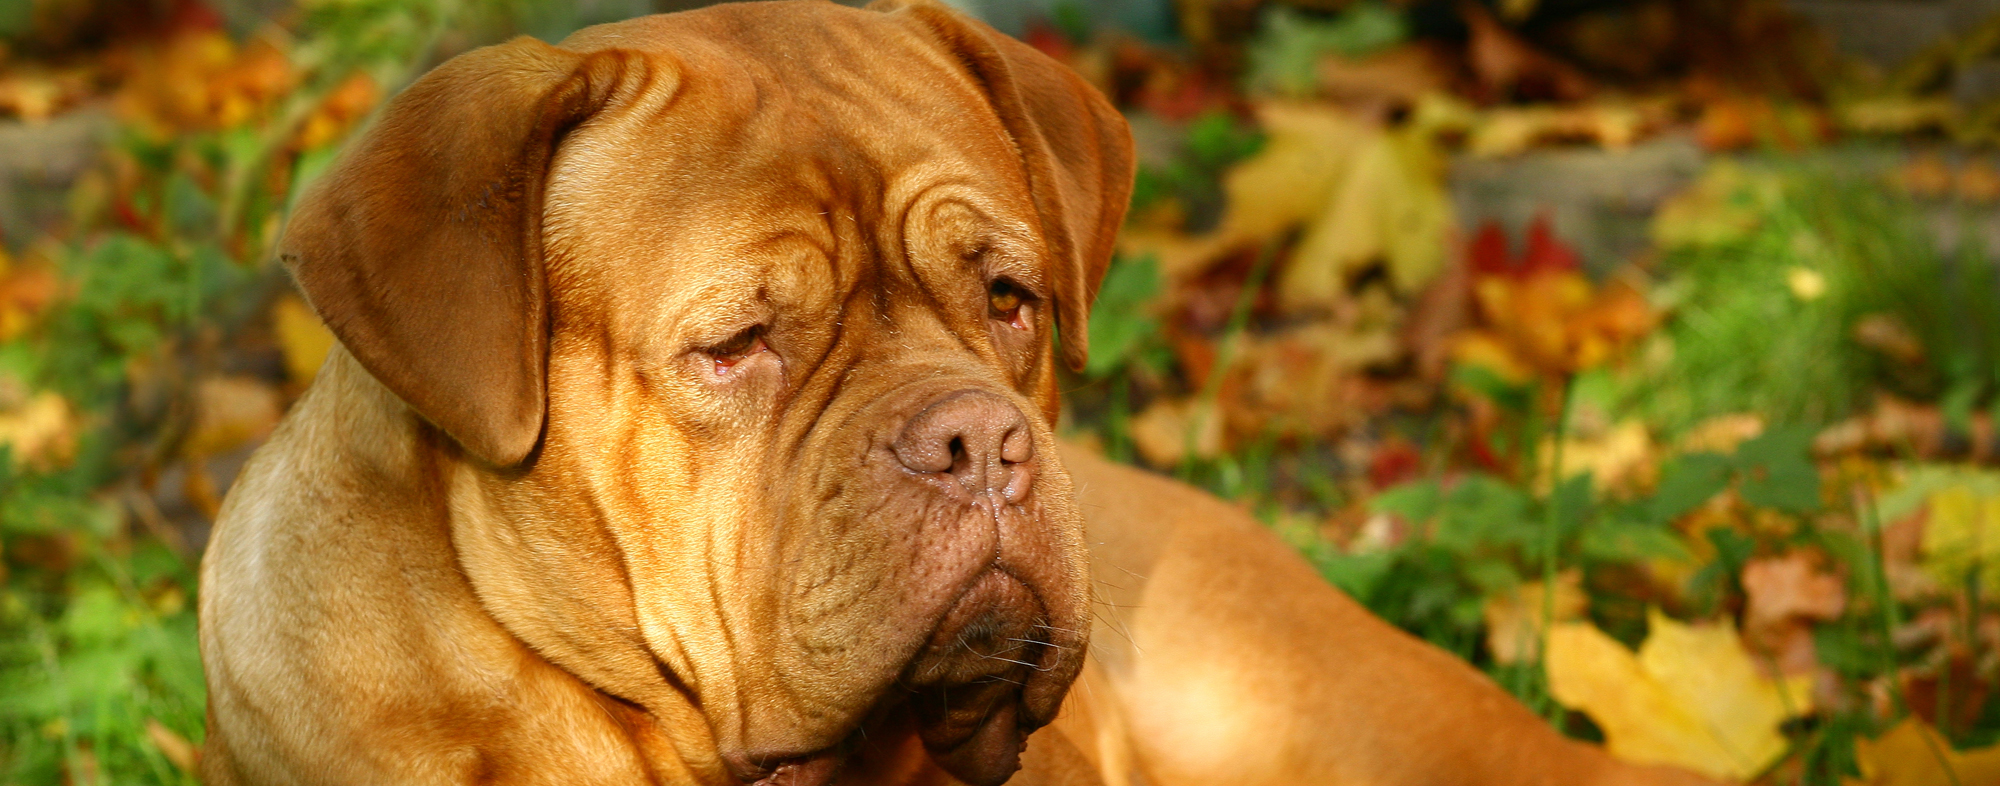 In the autumn, your dog could succumb to mushroom poisoning